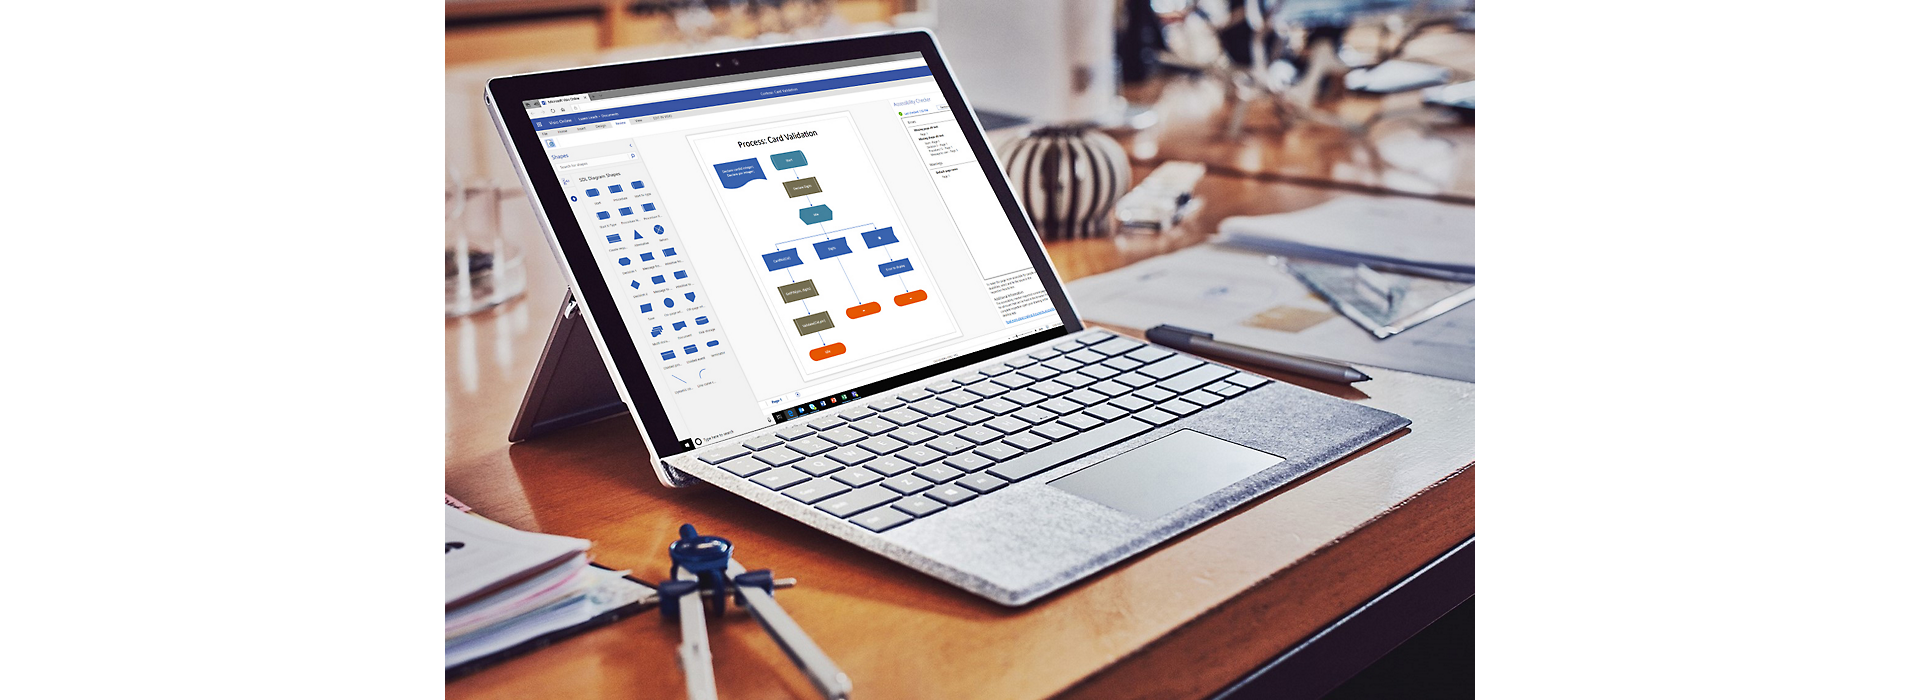 A Surface laptop with a flowchart open in Visio